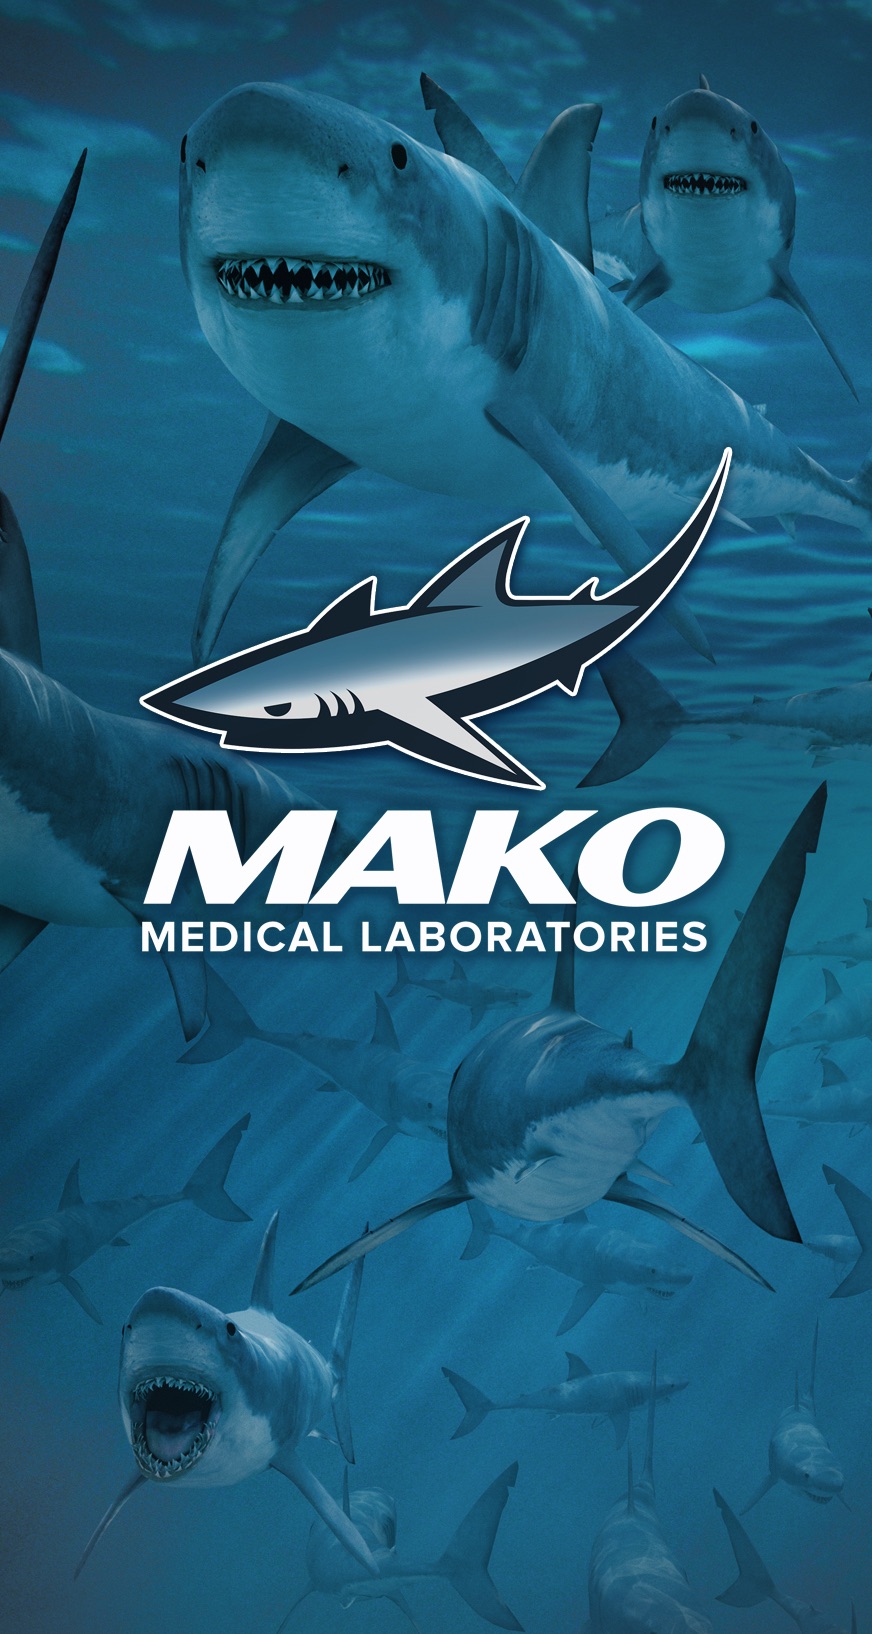 Chad Price, CEO of Raleigh-Based Mako Medical & Mako Medical Laboratories Launches a New Monkeypox Test